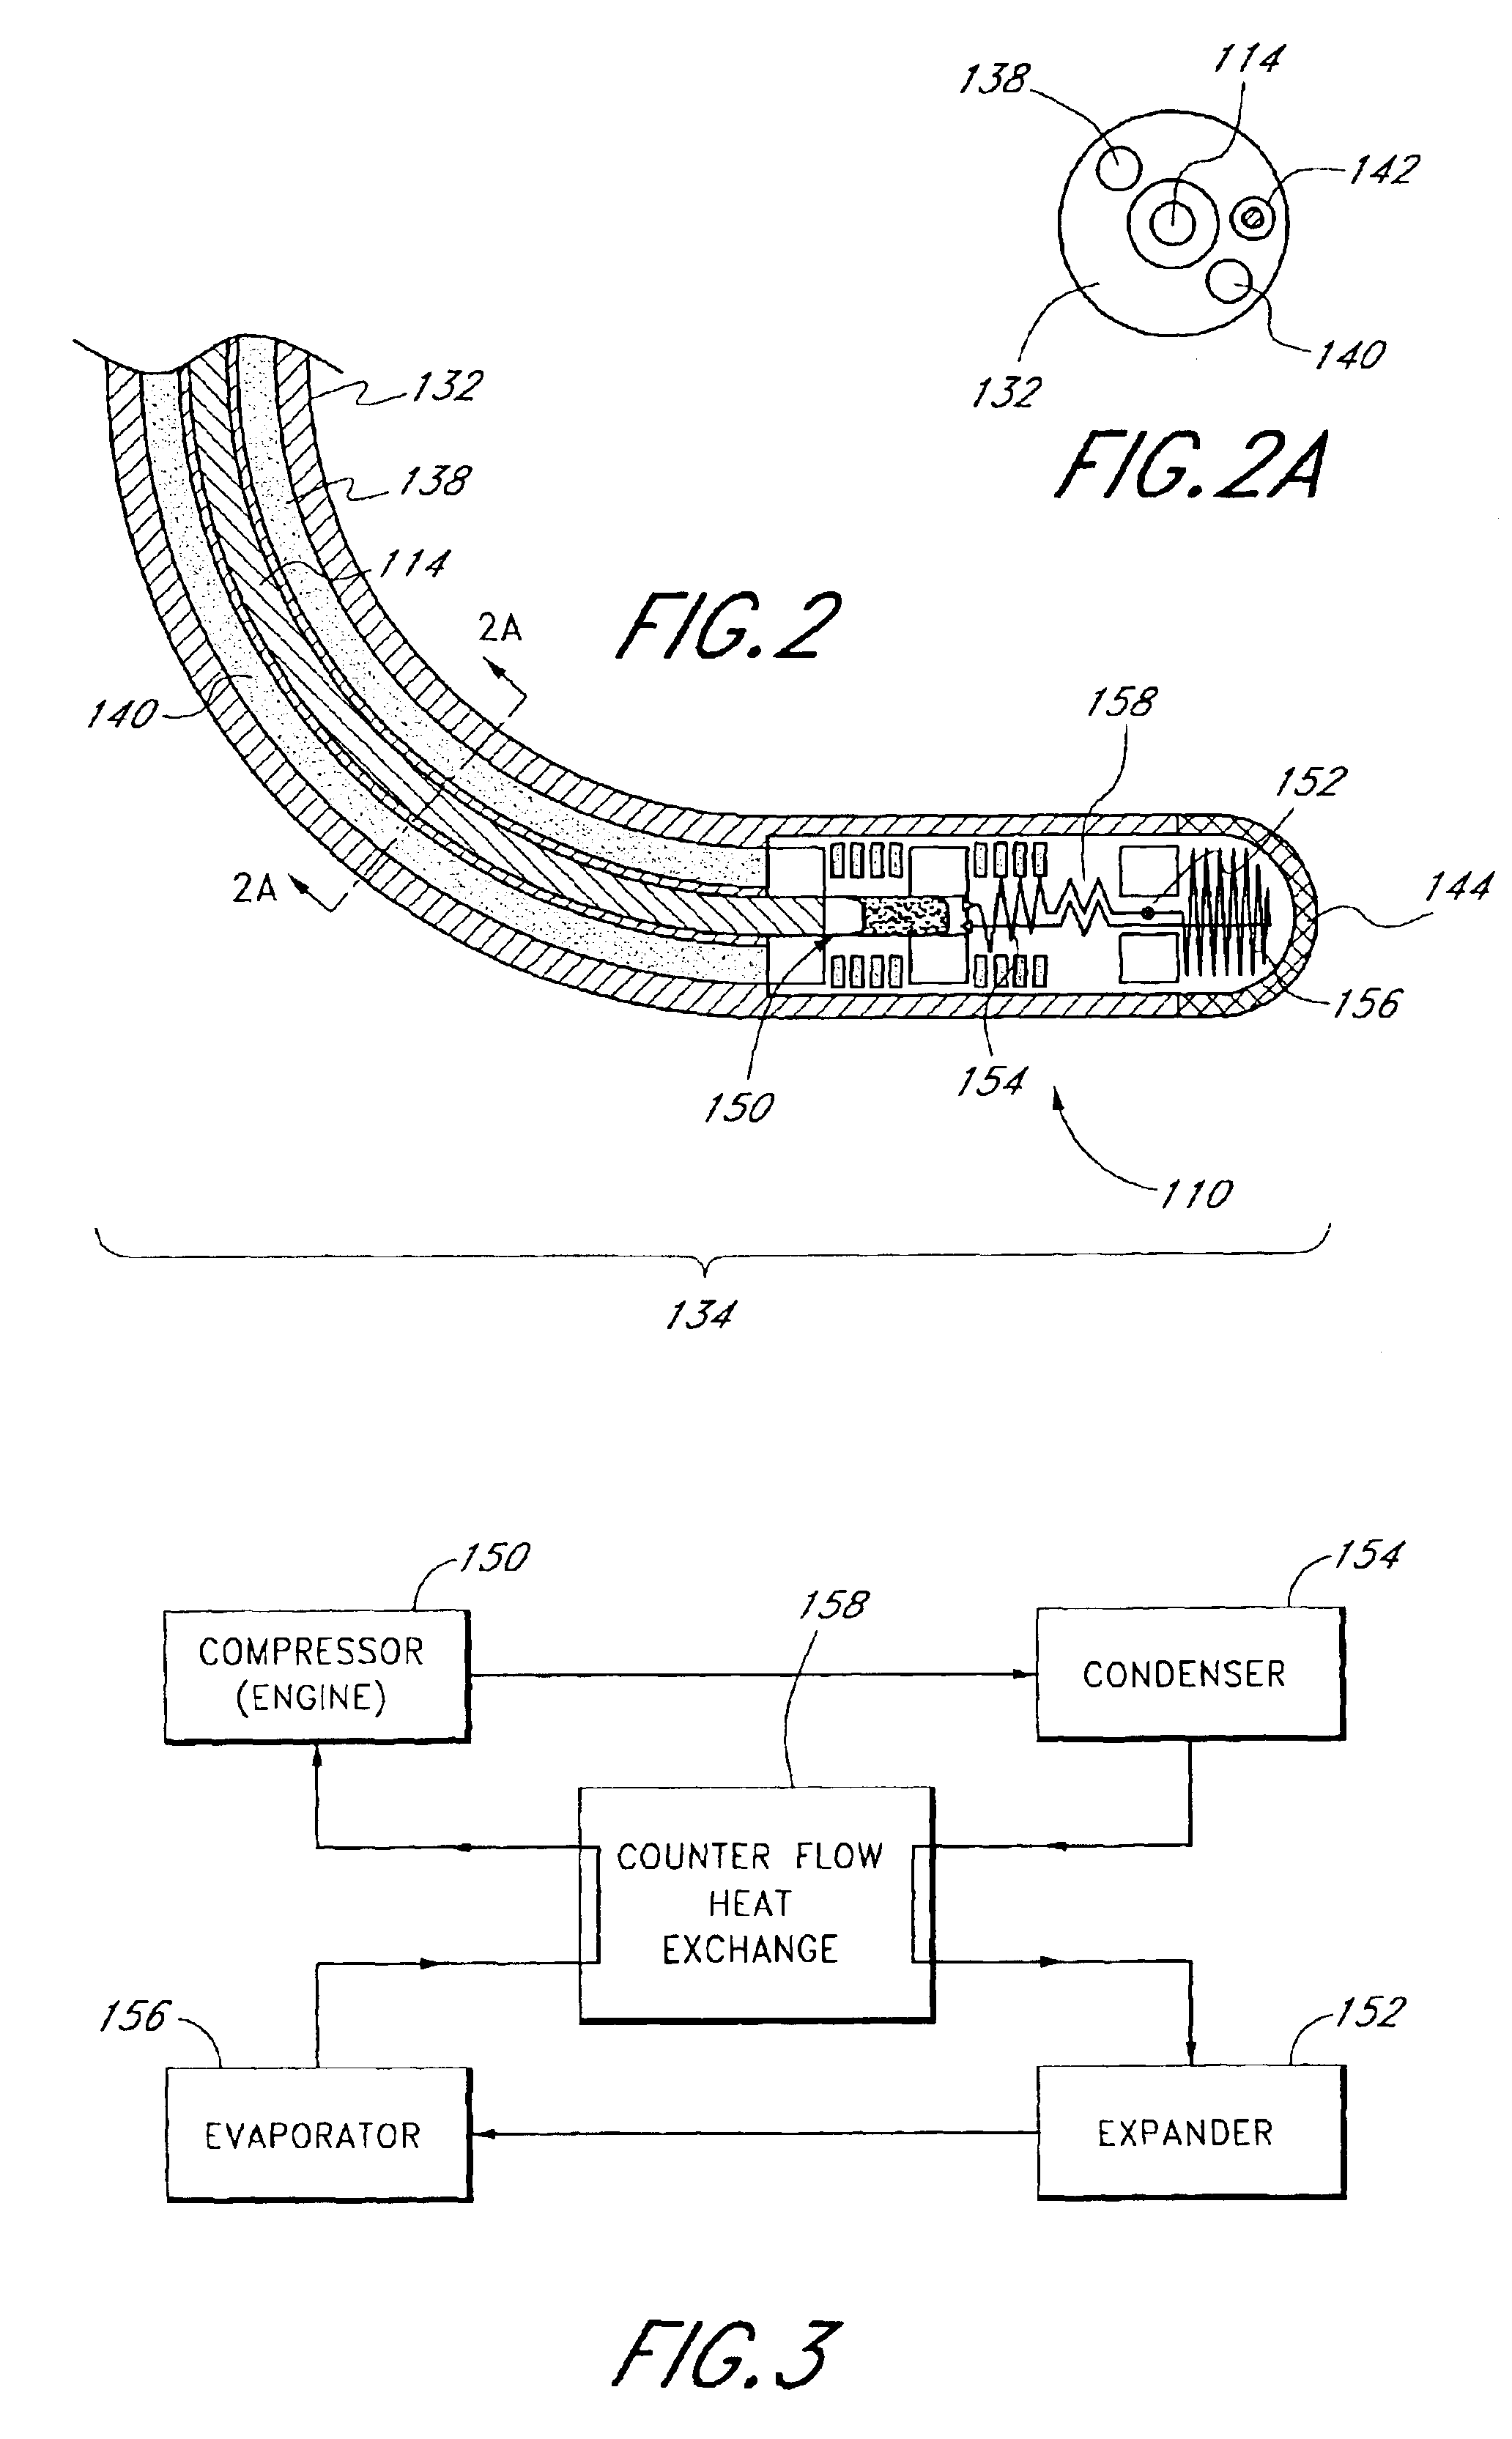 Miniature refrigeration system for cryothermal ablation catheter